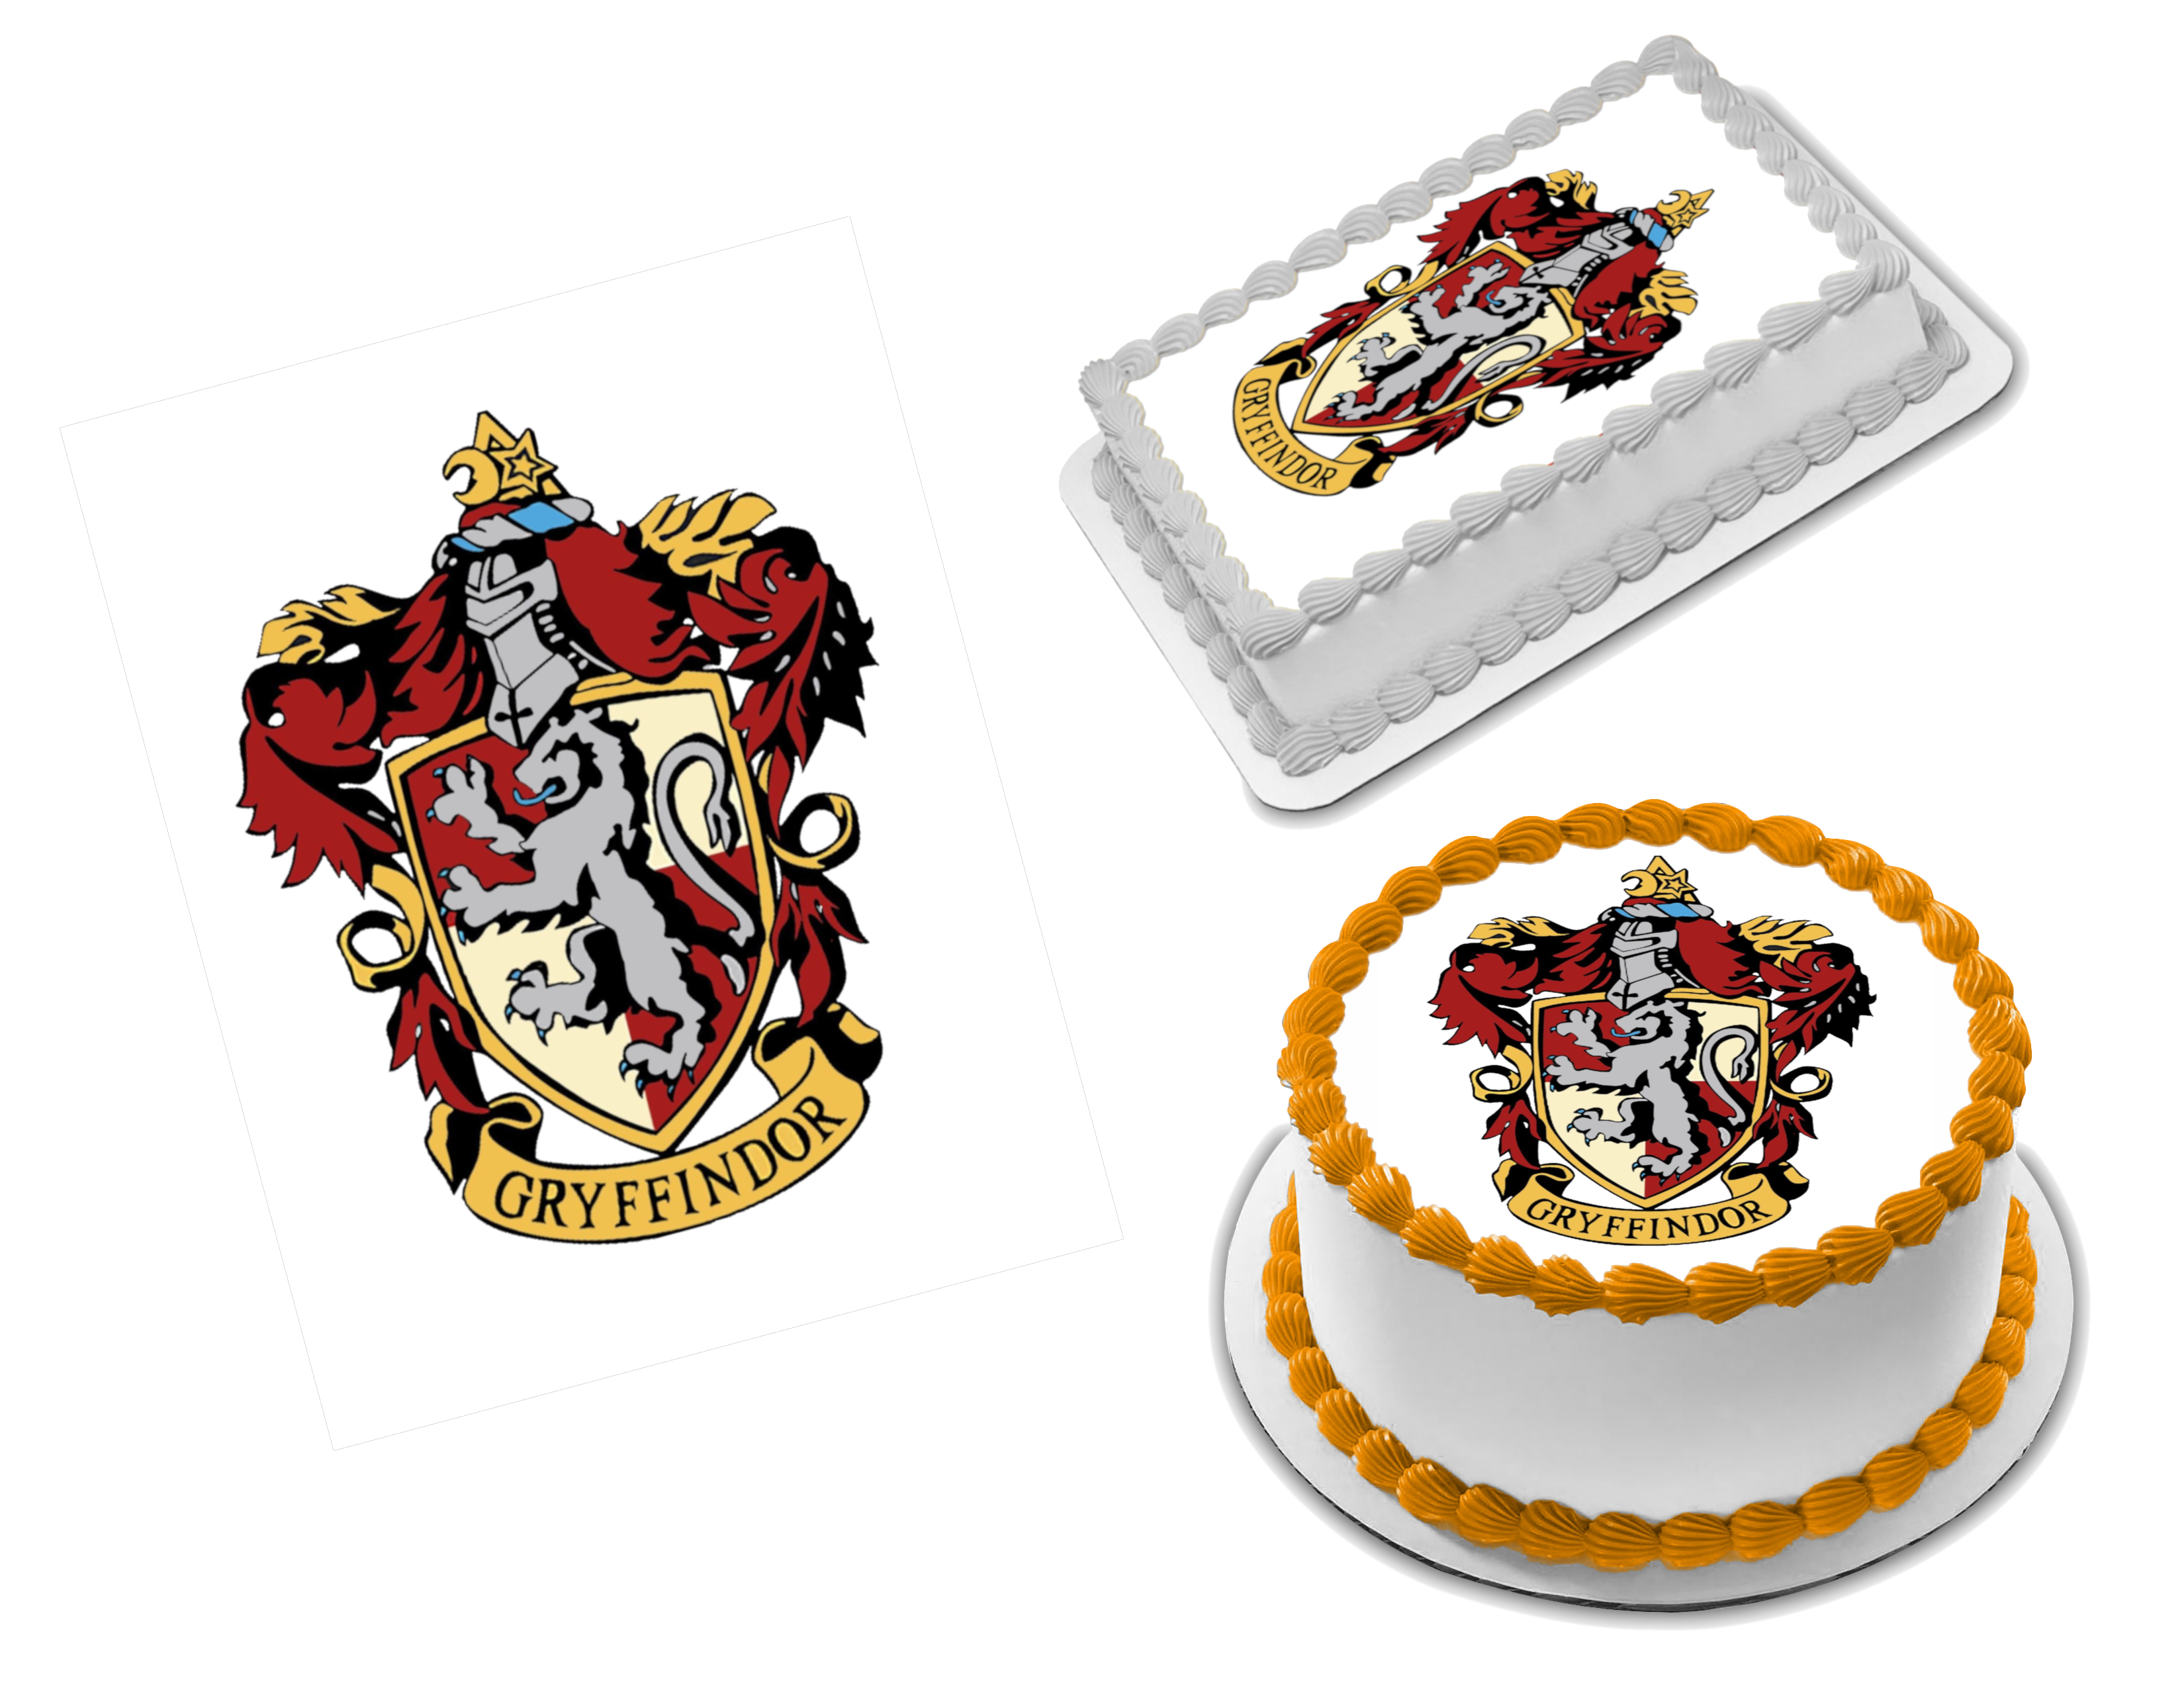 How to Make & Decorate HARRY POTTER Cookies - Gryffindor Decorated Cookies  